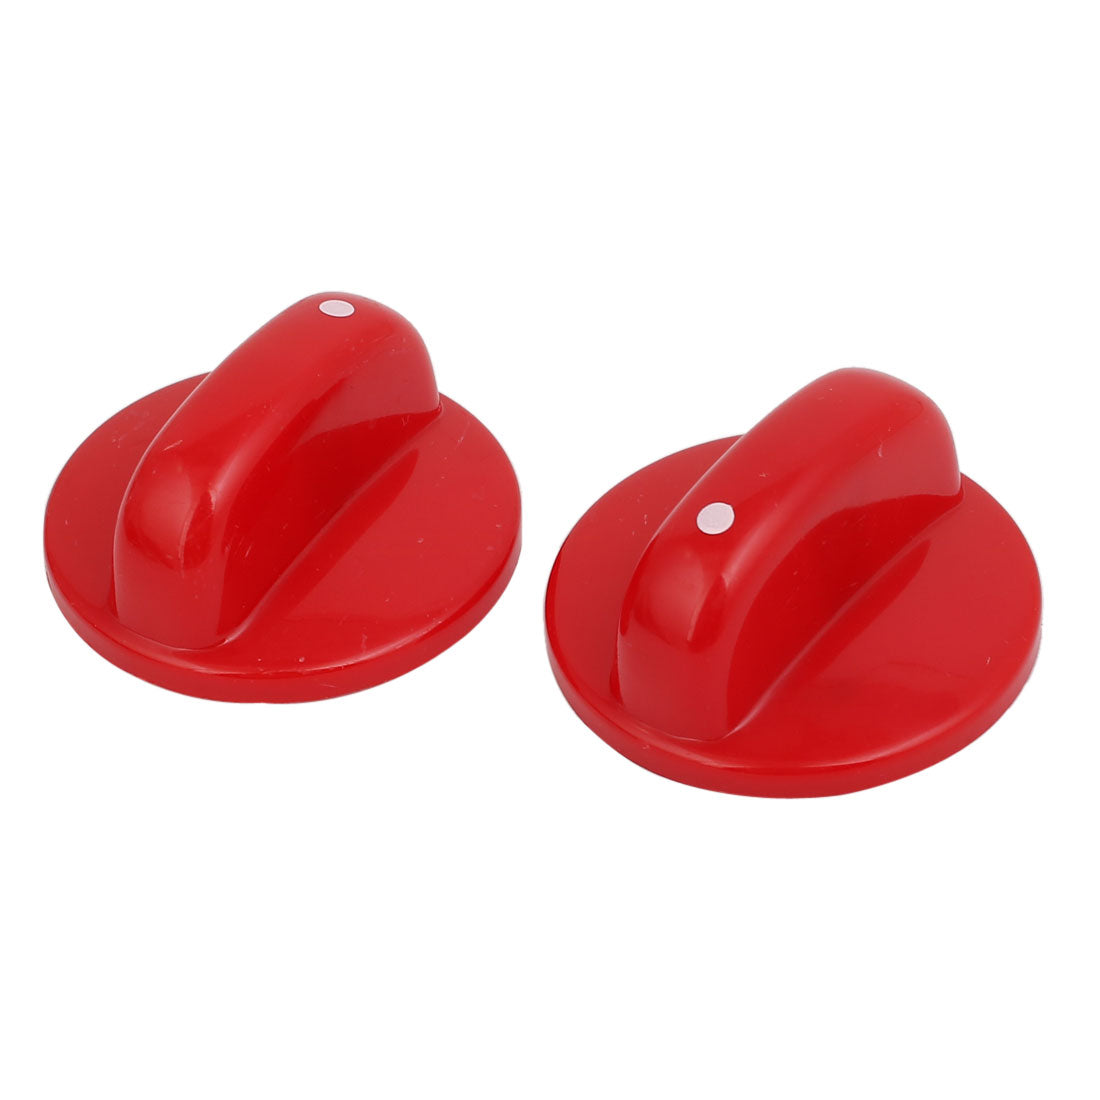 Uxcell Uxcell Kitchen Plastic Round Cooker Control Switch Knob Red 2pcs